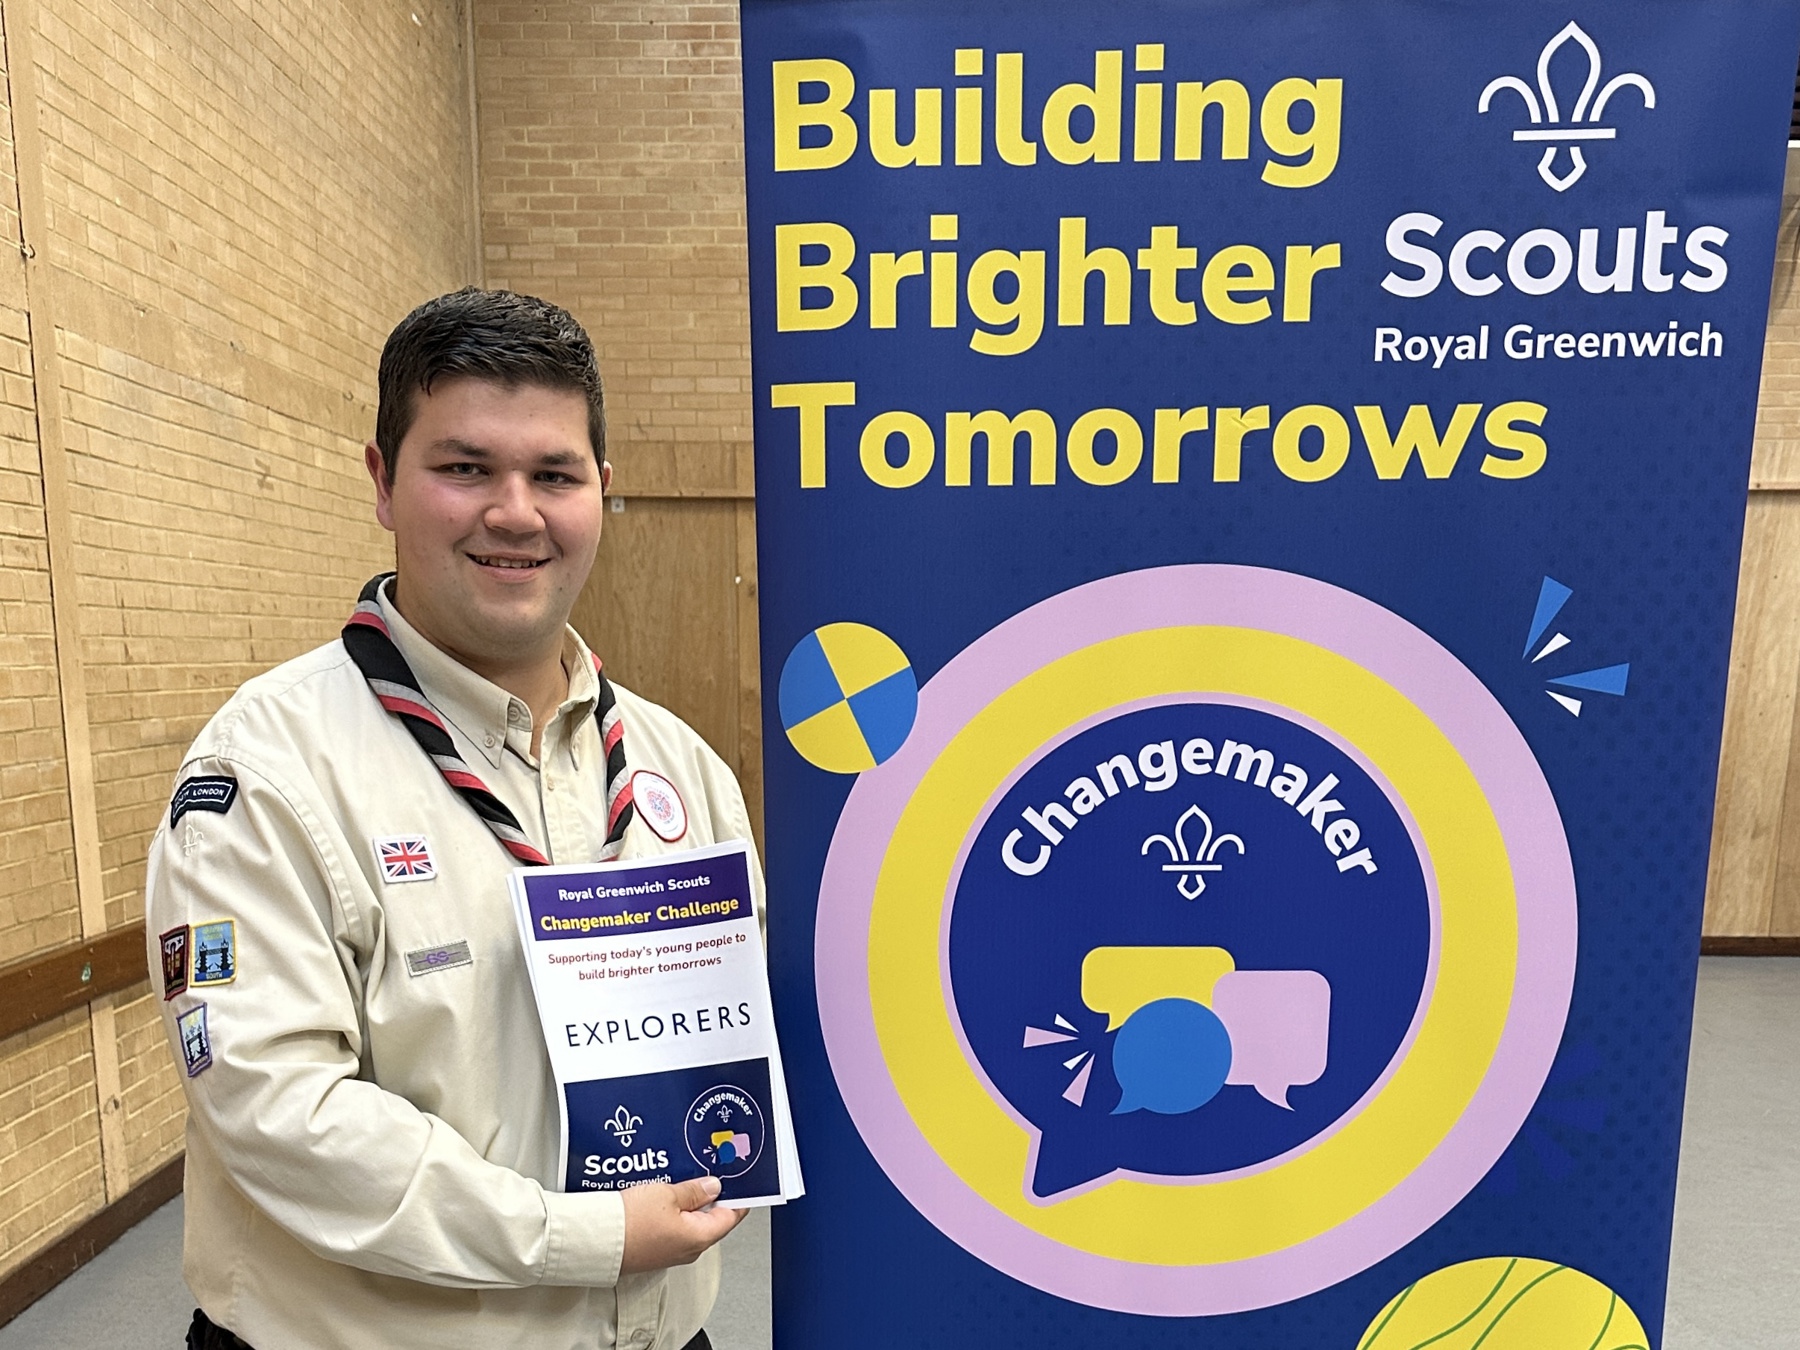 Joseph is stood inside of a hall to the left holding the Changemaker Challenge pack that he created. He's wearing his Scout volunteer uniform with a necker and he's smiling at the camera. To the right of him is a standing banner that says 'Building Brighter Tomorrows' with the Changemaker badge logo underneath. There's a white Scouts Royal Greenwich logo in the top left corner.